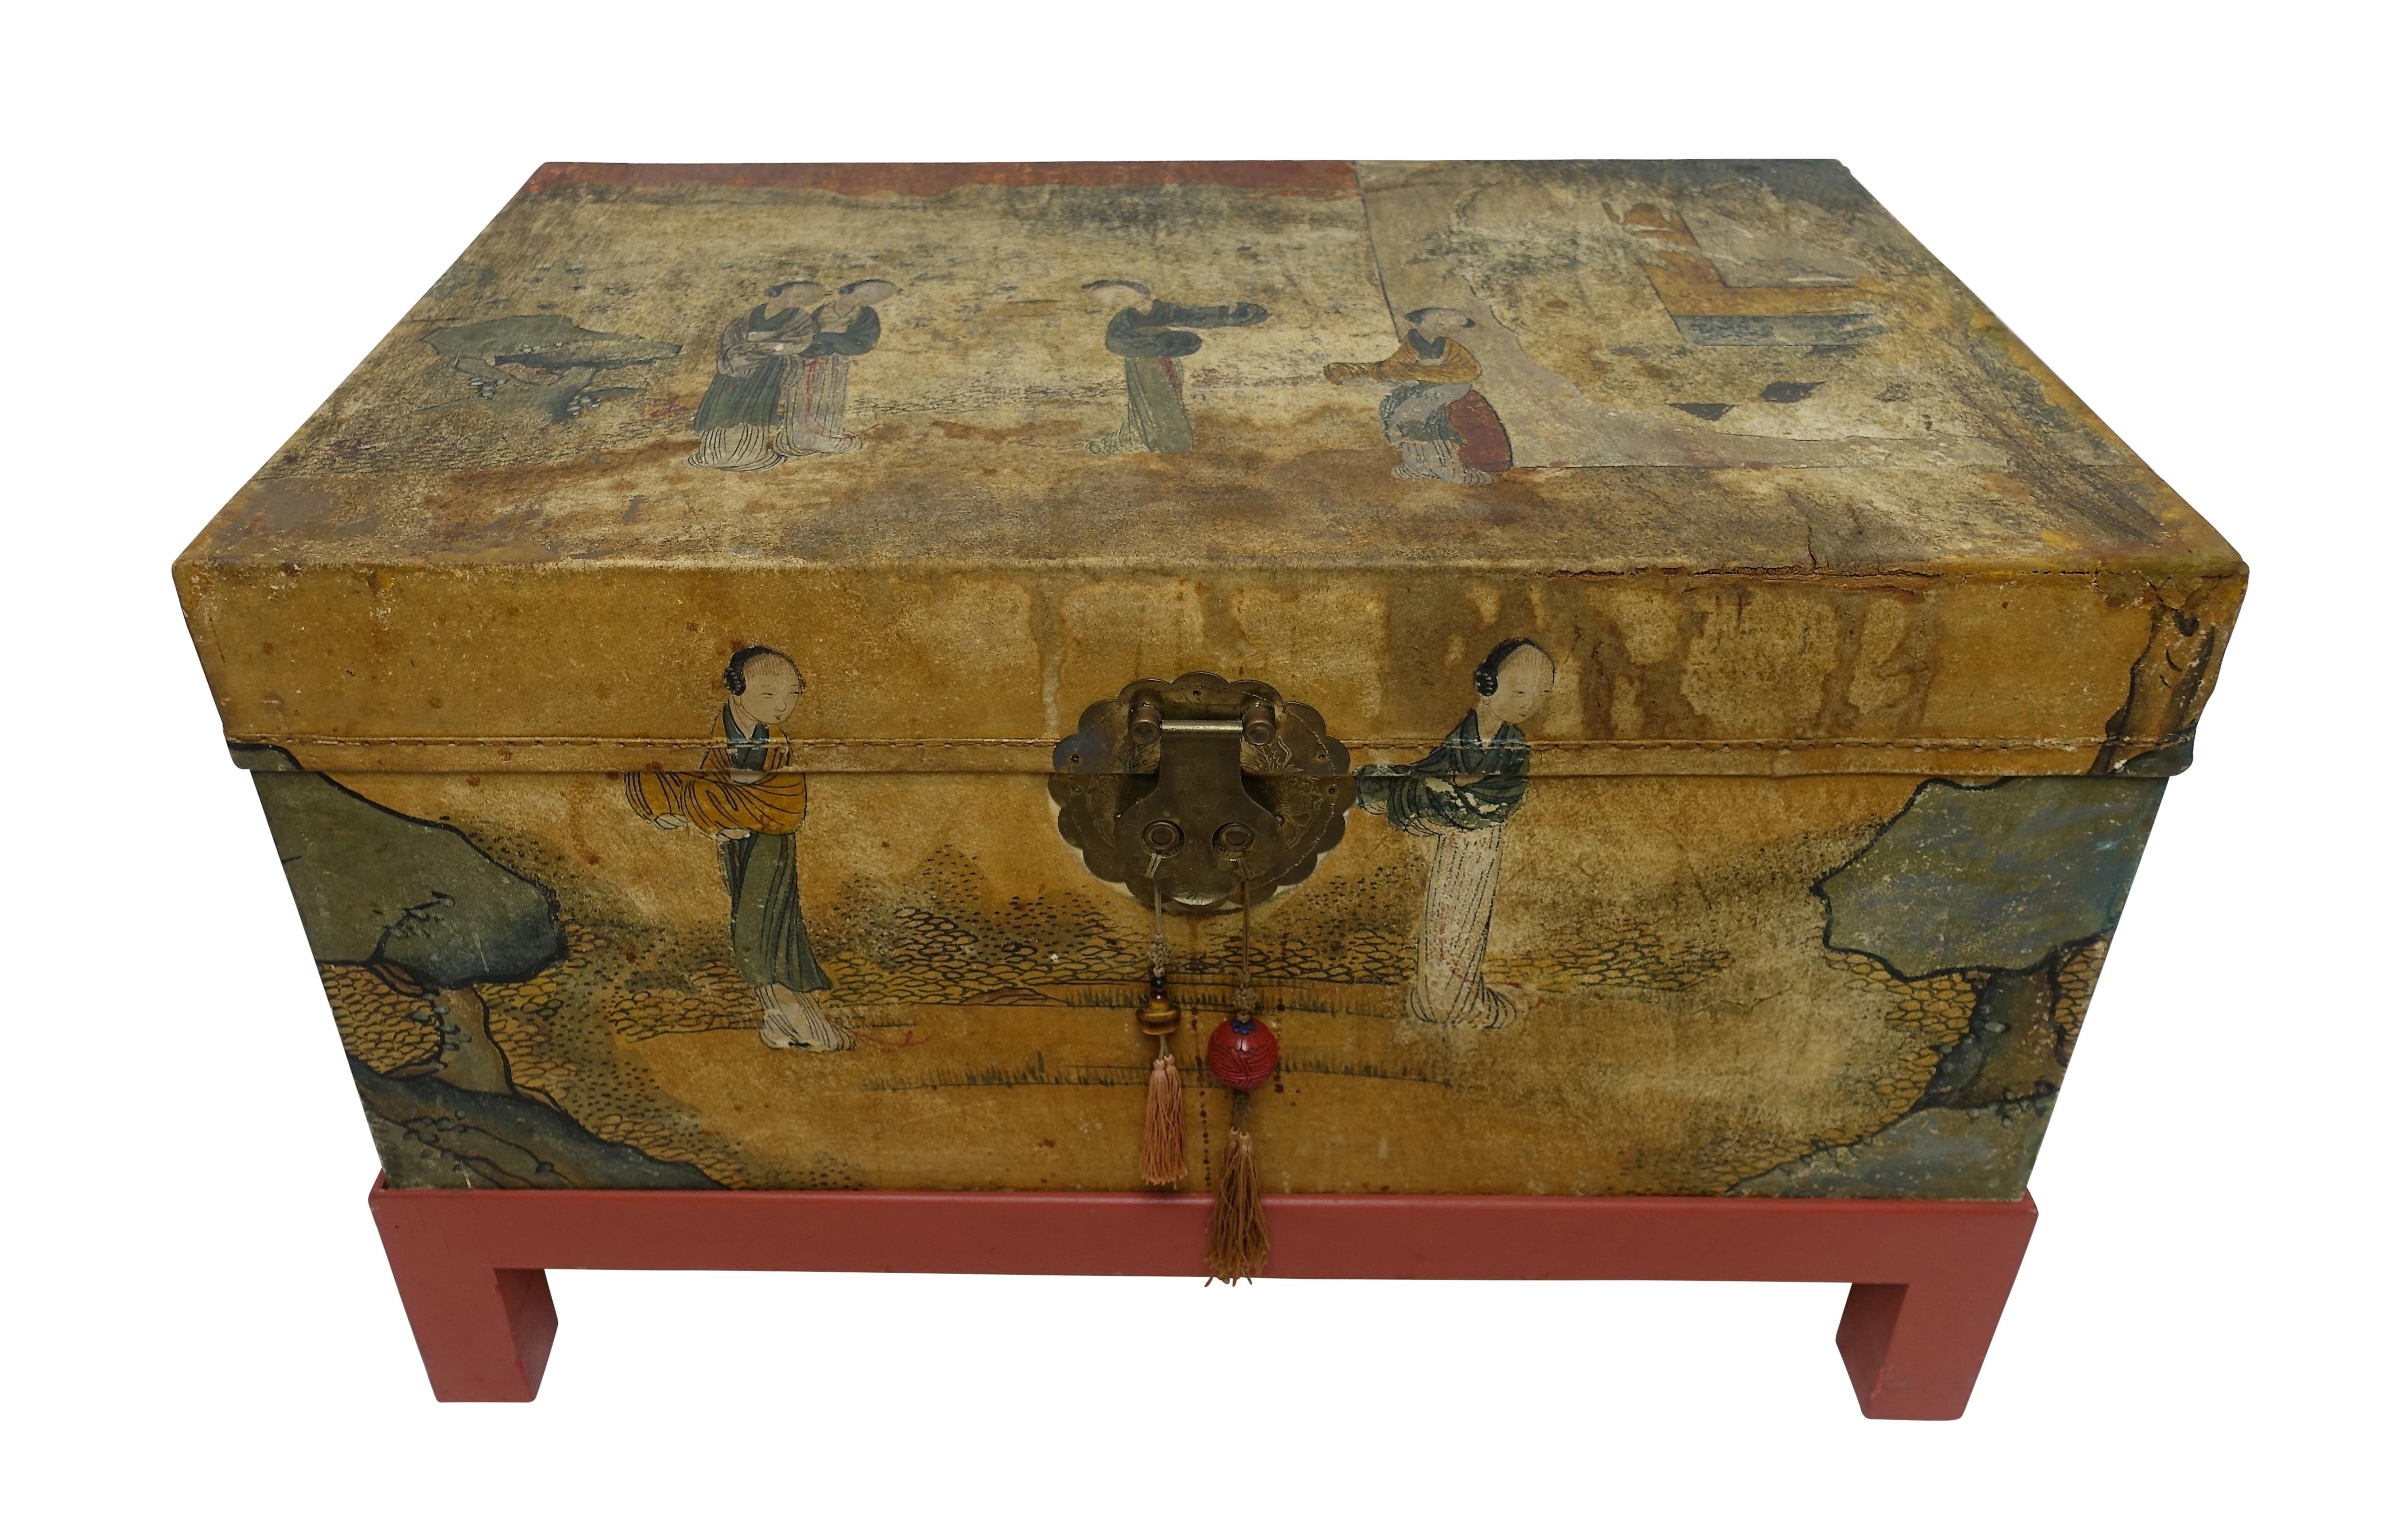 Hand painted pigskin leather trunk on later made painted stand, having brass hardware and retaining its original paper lining, China, early 20th century.